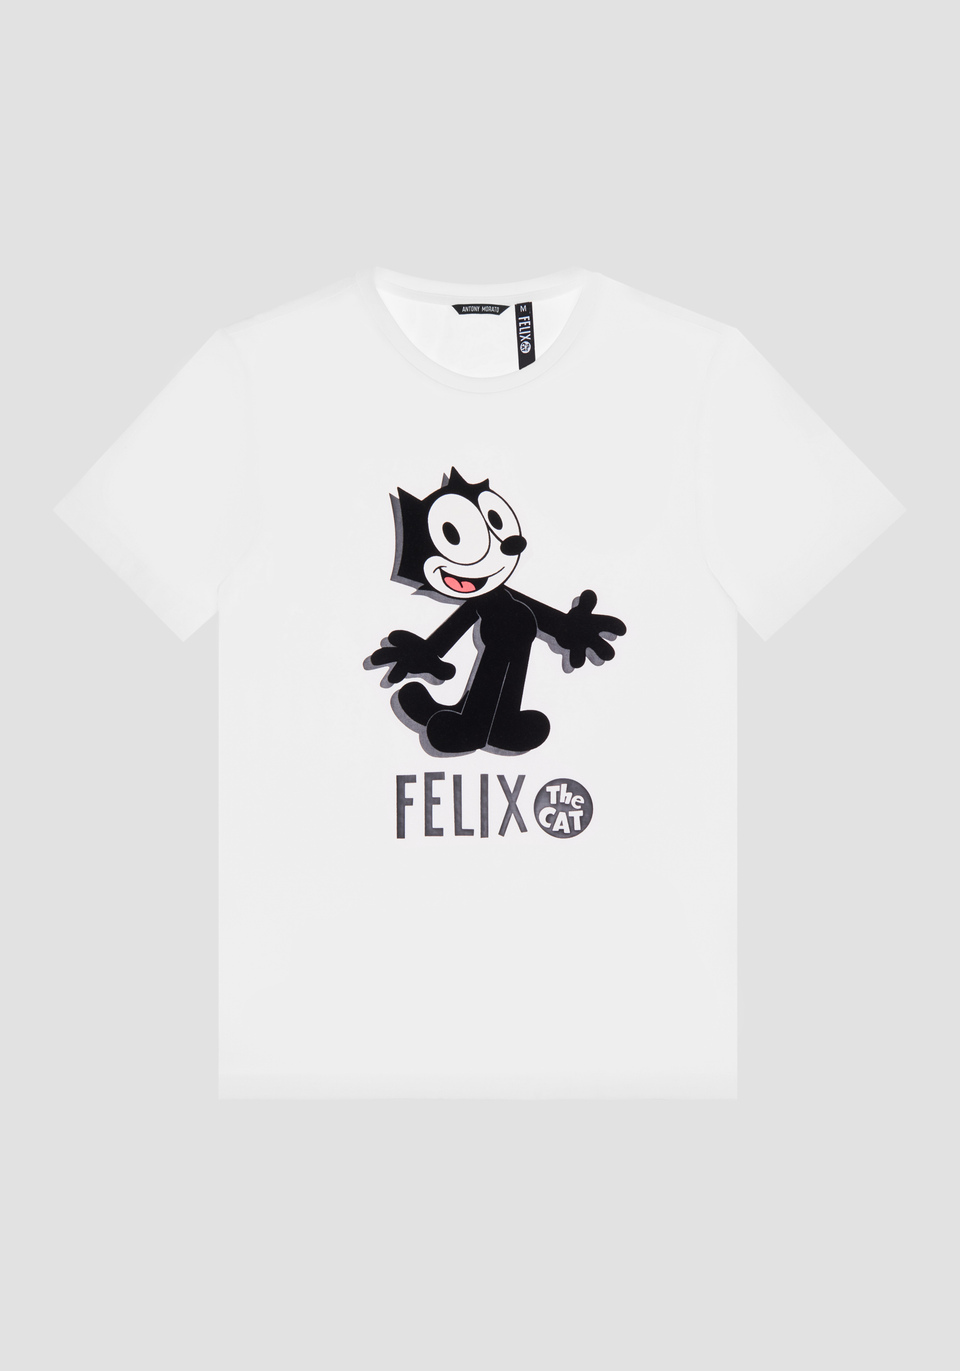 REGULAR-FIT T-SHIRT IN PURE COTTON WITH FRONT FELIX THE CAT PRINT - Antony Morato Online Shop